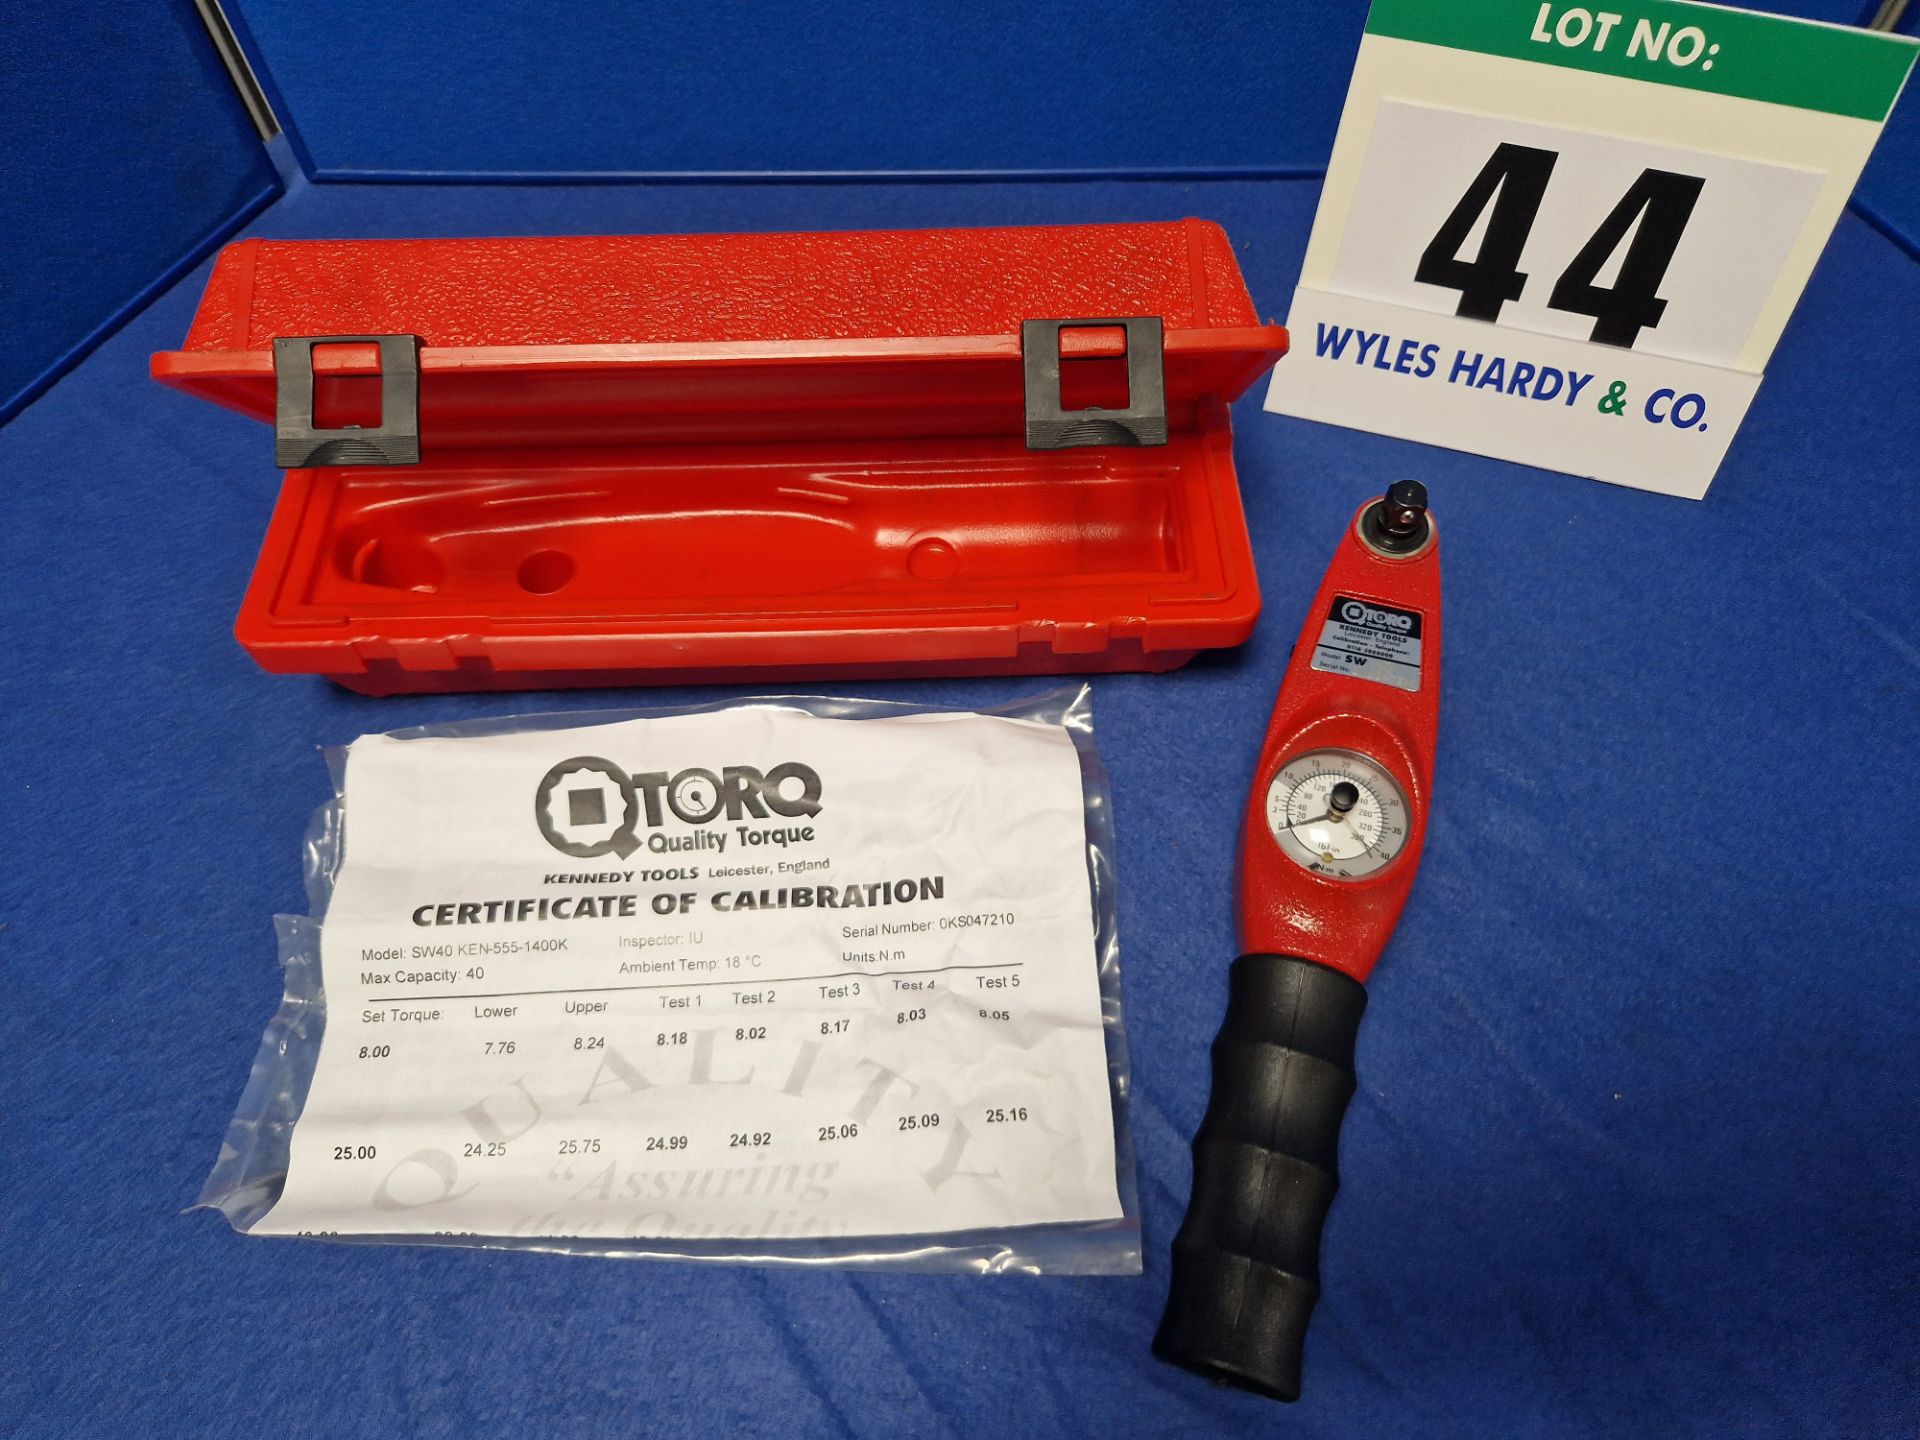 One TORO 5440 3/8 inch Square Drive 0-40Nm/360 lfb-in Dial Indicating Torque Wrench in Rigid Carry